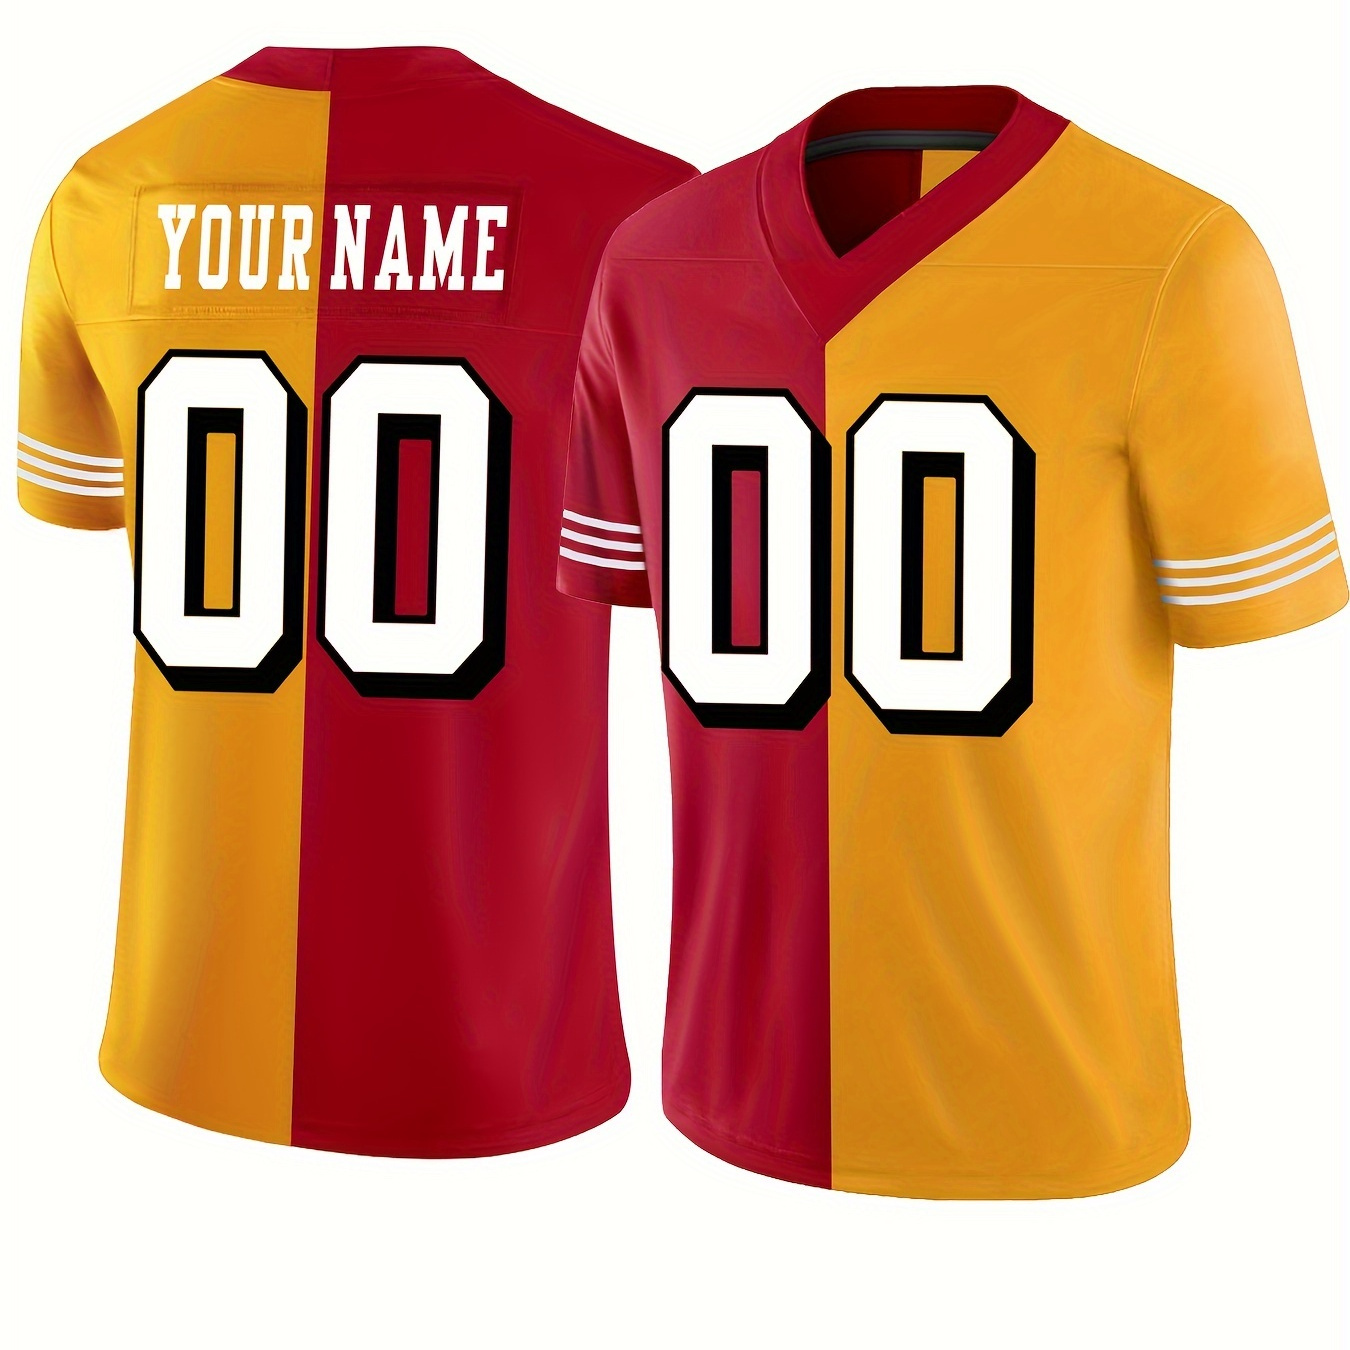 

Custom Name And Number, Men's Baseball Jersey, Leisure Sports Style, Personalized Name And Number, Athletic Team Uniform, As Gifts